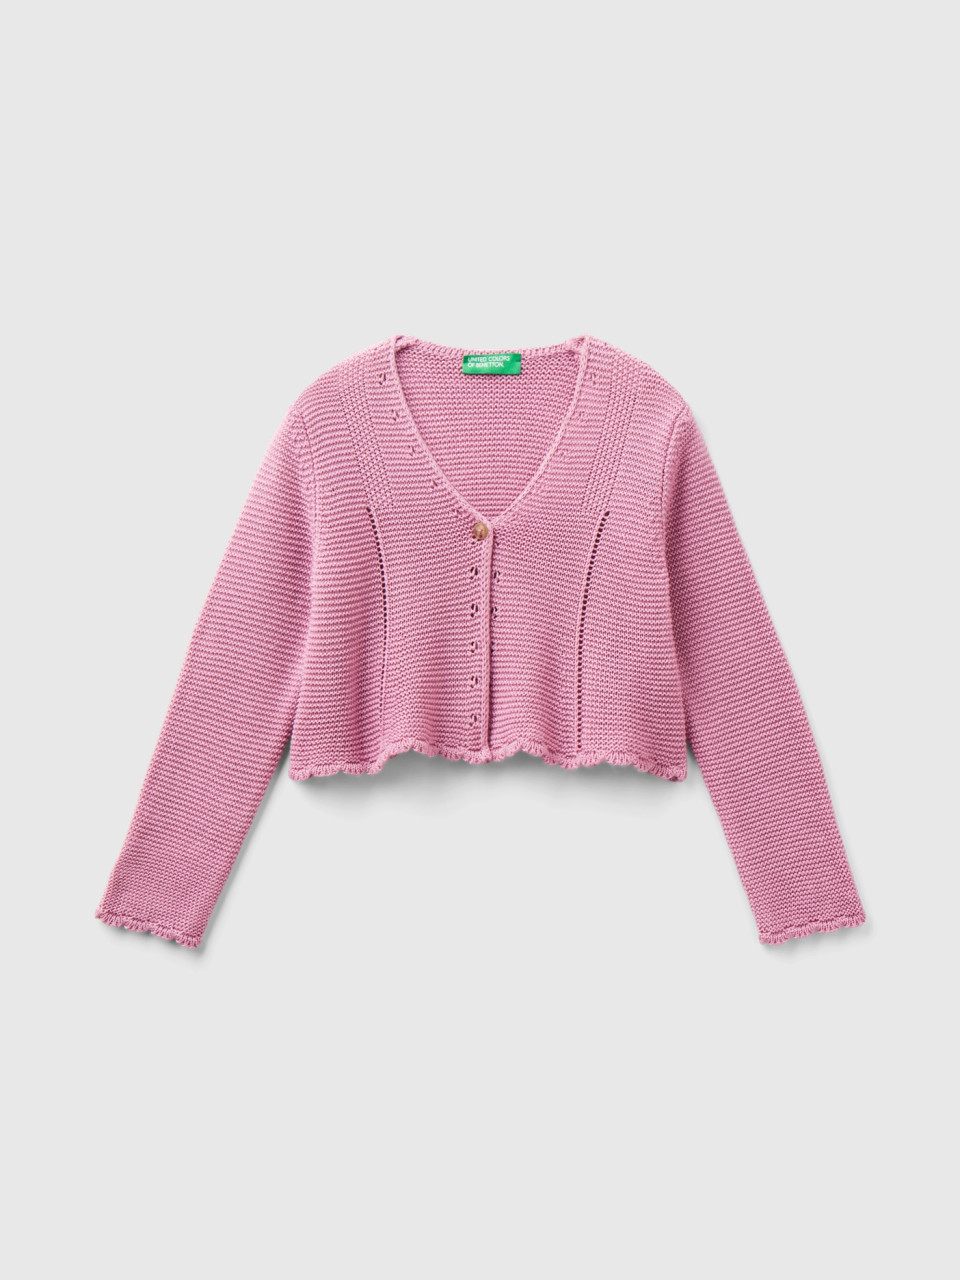 Benetton, Cardigan In Linen And Viscose Blend, Lilac, Kids